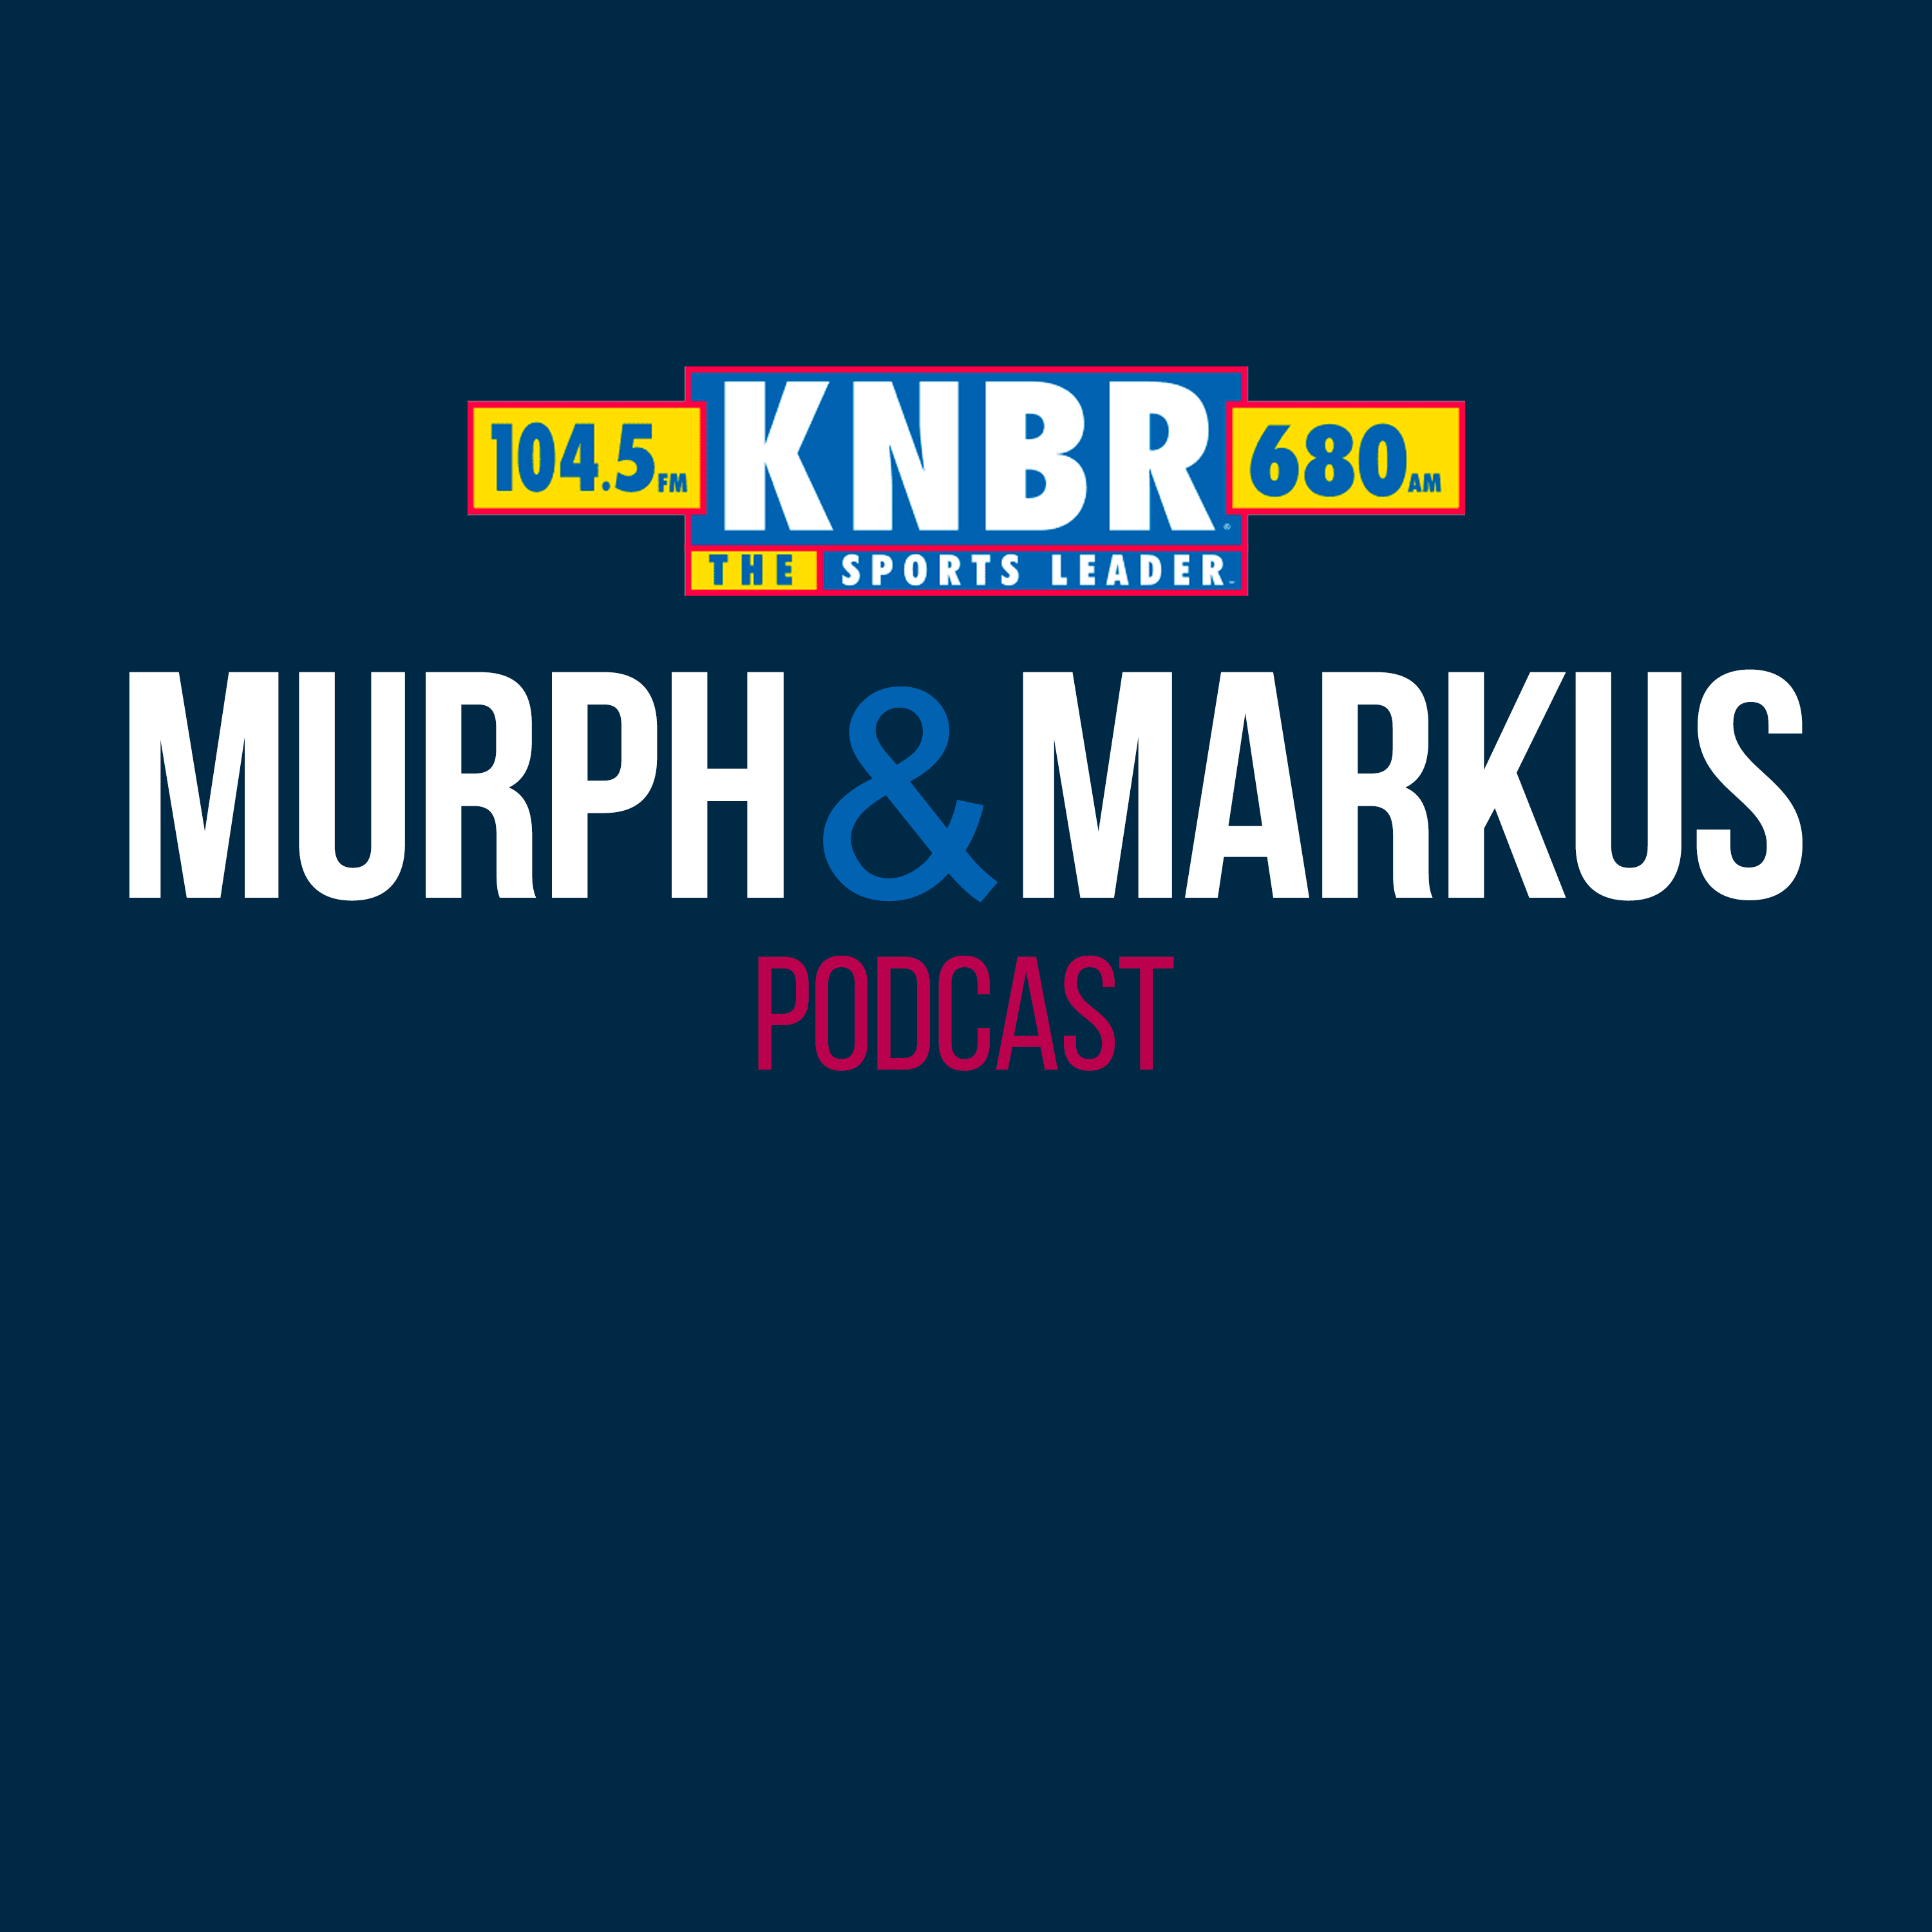 6-21 Hour 1: Murph & Markus share their thoughts on everything that happened at the Rickwood Field game last night, react to Reggie Jackson's pregame comments, and talk to Jake Peavy